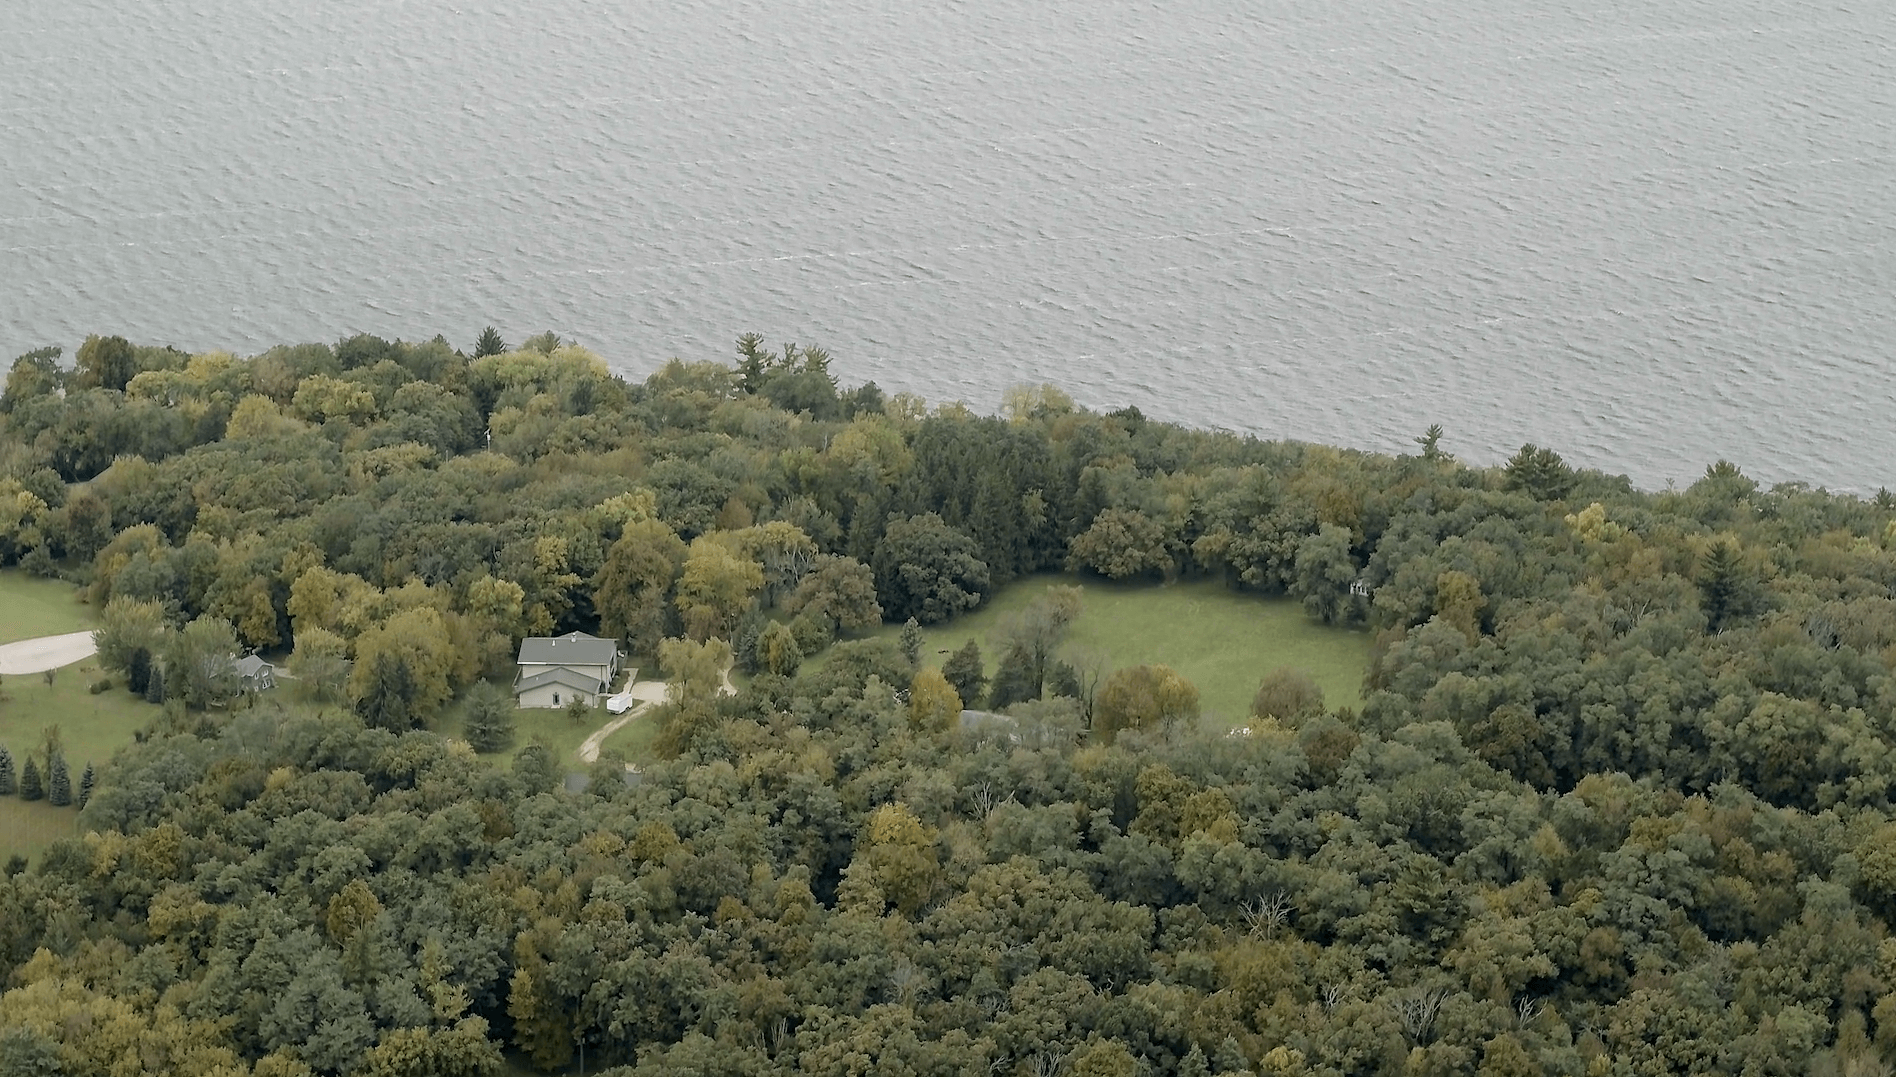 An aerial view of the Tichora Conservancy with a house surrounded by trees and on the shore of a lake.